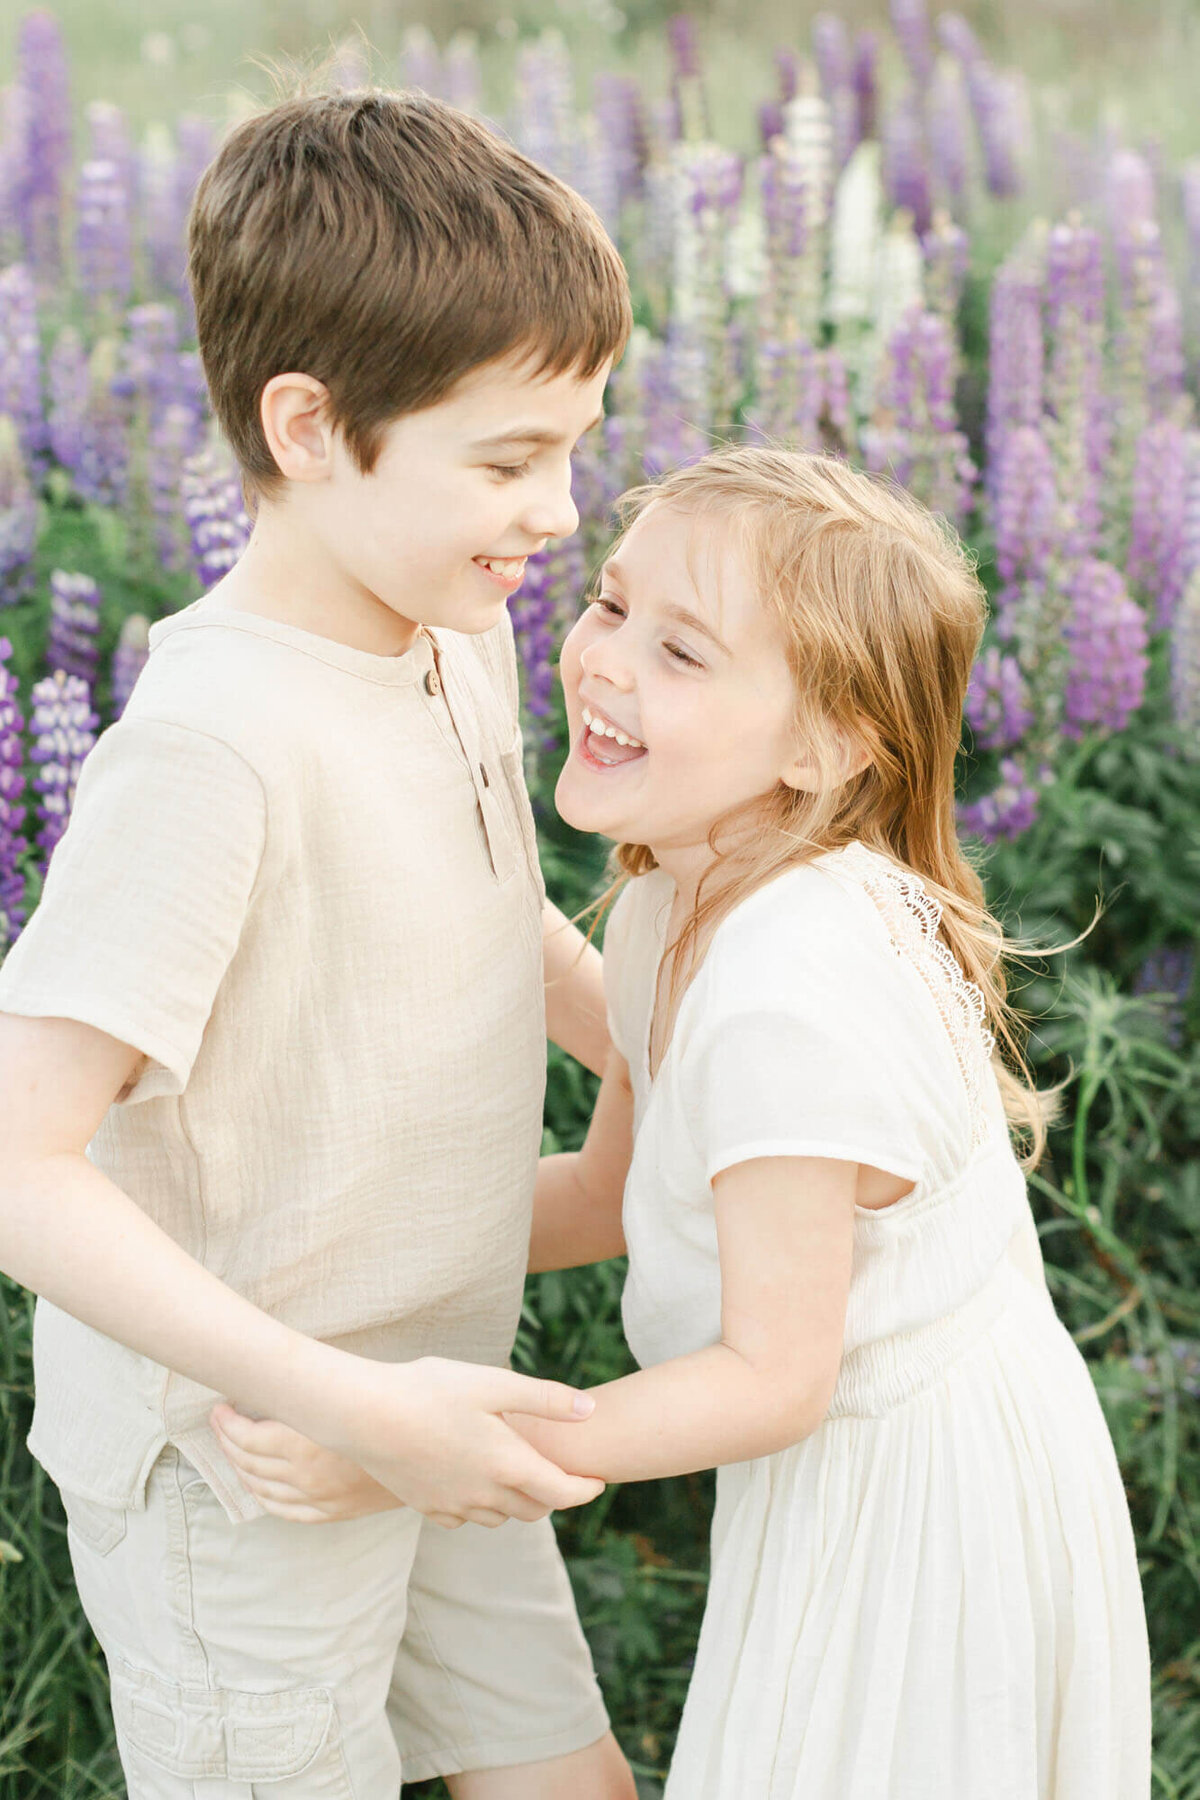 Boy who is about 8 is holding his sisters arms, sister is about 5. They are laughing with one another and standing in a field of purple and white lupine wildflowers. They are both dressed in light cream and taupe.